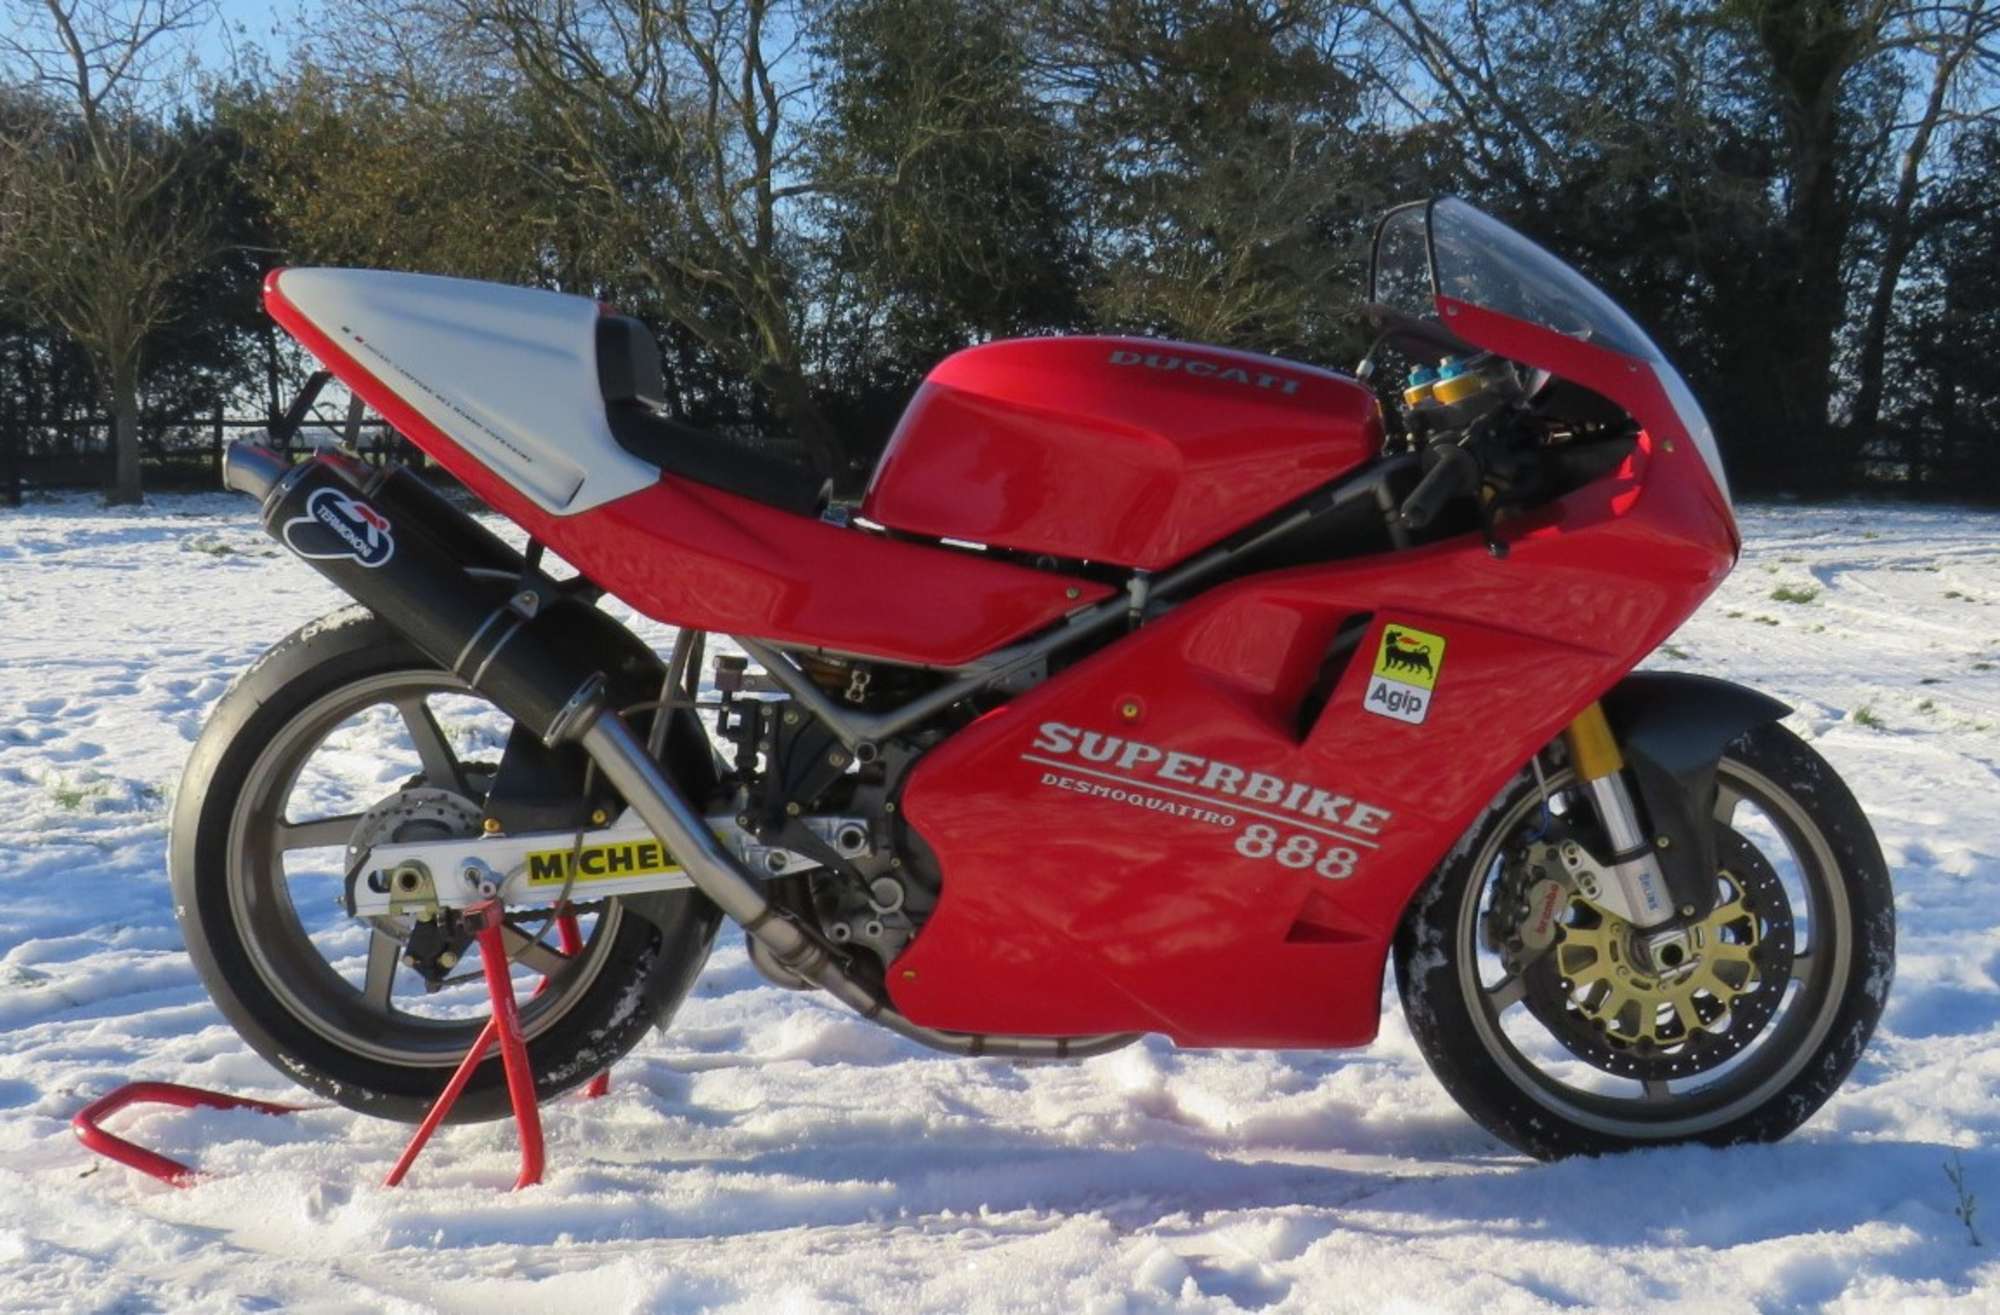 15 Of The Best And Rarest Ducati Motorcycles Come To Sale With Silverstone Auctions